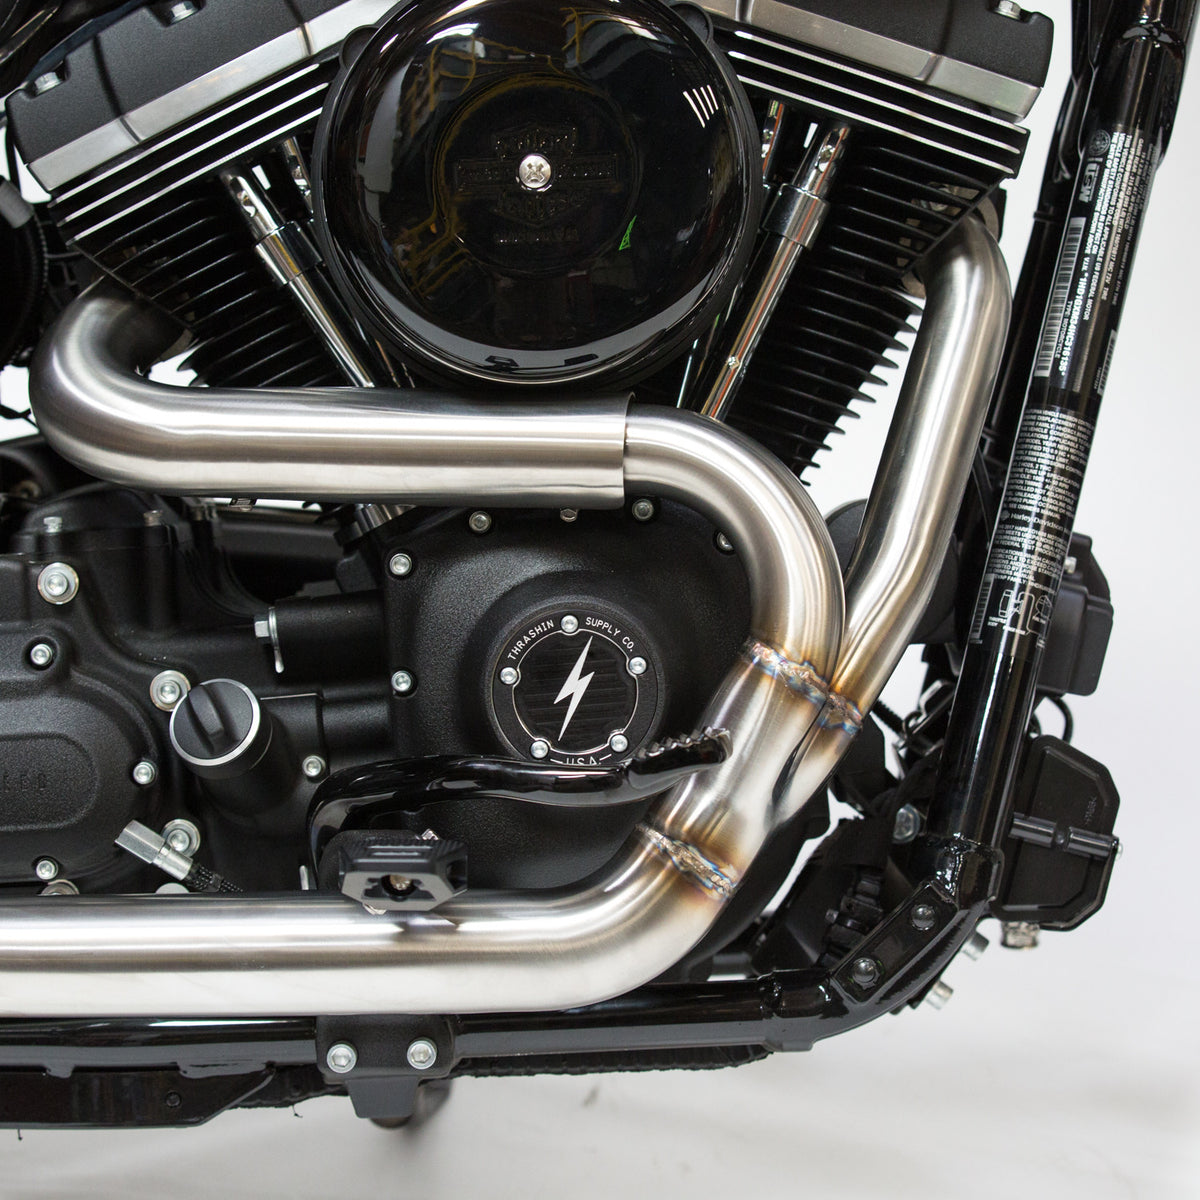 OG Stainless Exhaust w/ Removable Baffle & End Cap - FXR